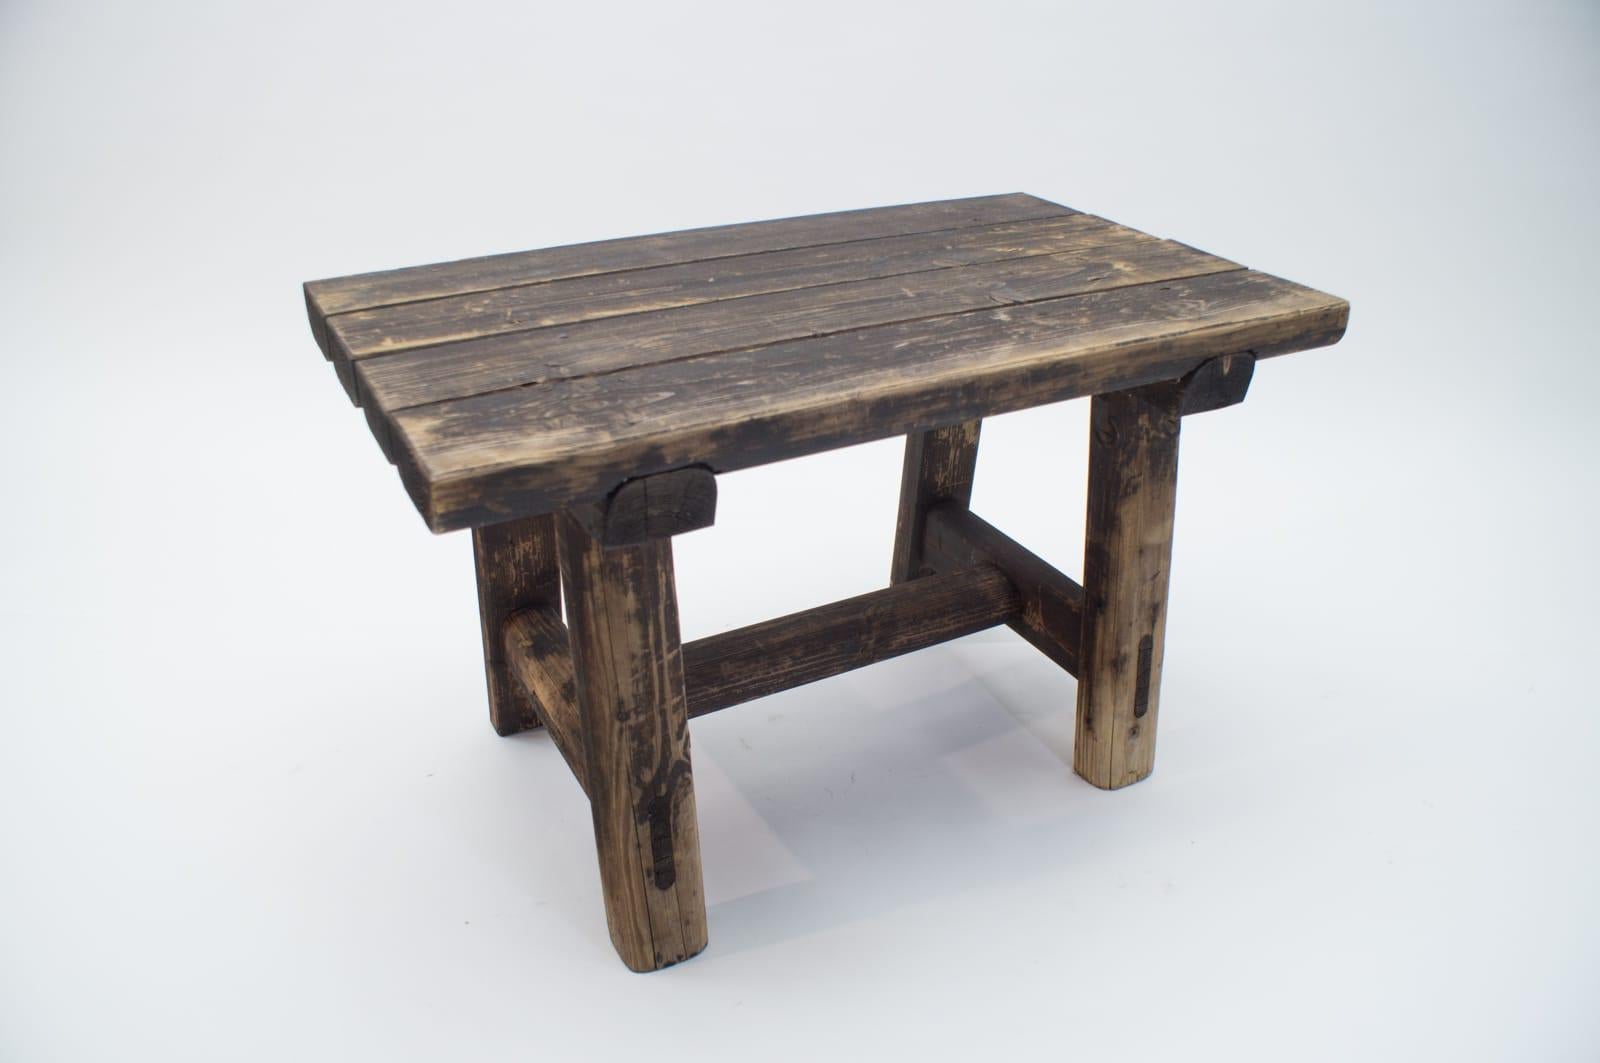 Very nice, handmade bench from the Black Forest.

No nails or screws were used, only tenons.

Very nice patina and signs of age.

There is a second bench available.